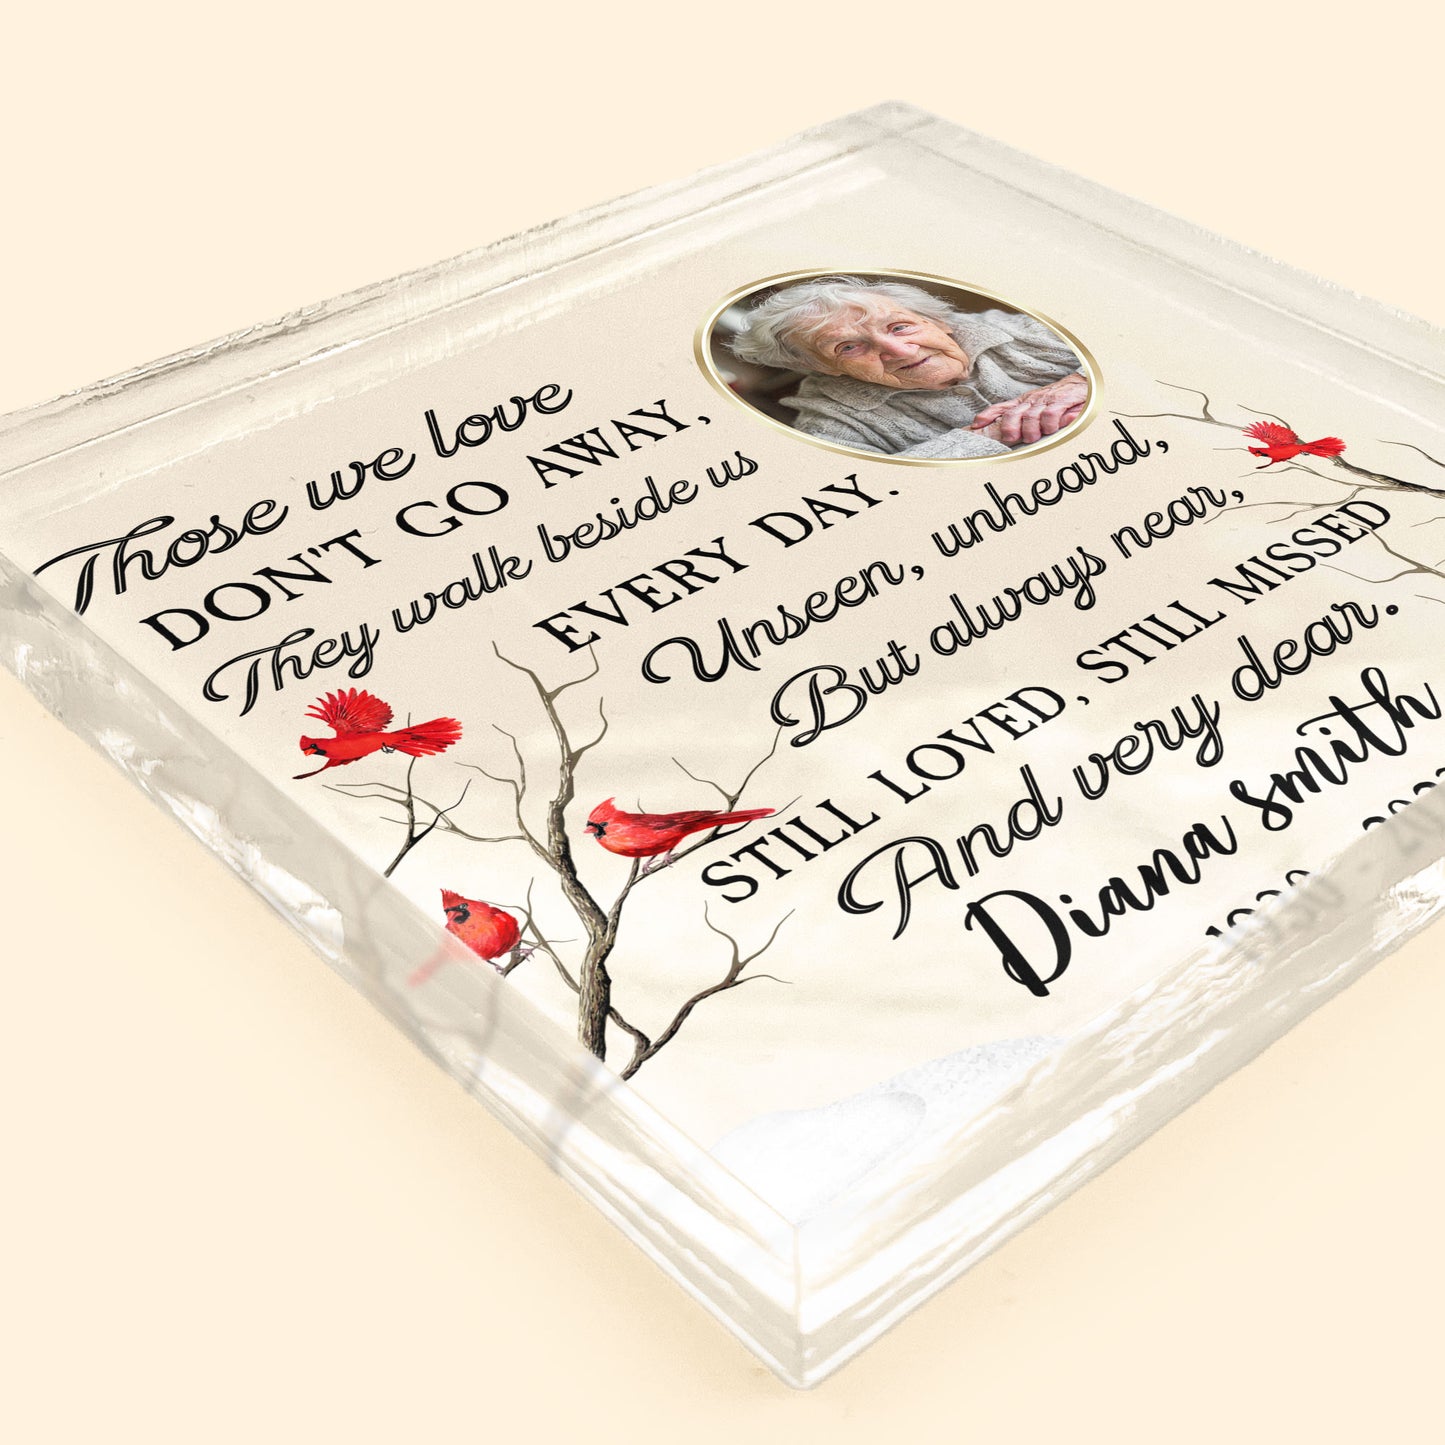 Those We Love Don't Go Away - Personalized Square-Shaped Acrylic Photo Plaque